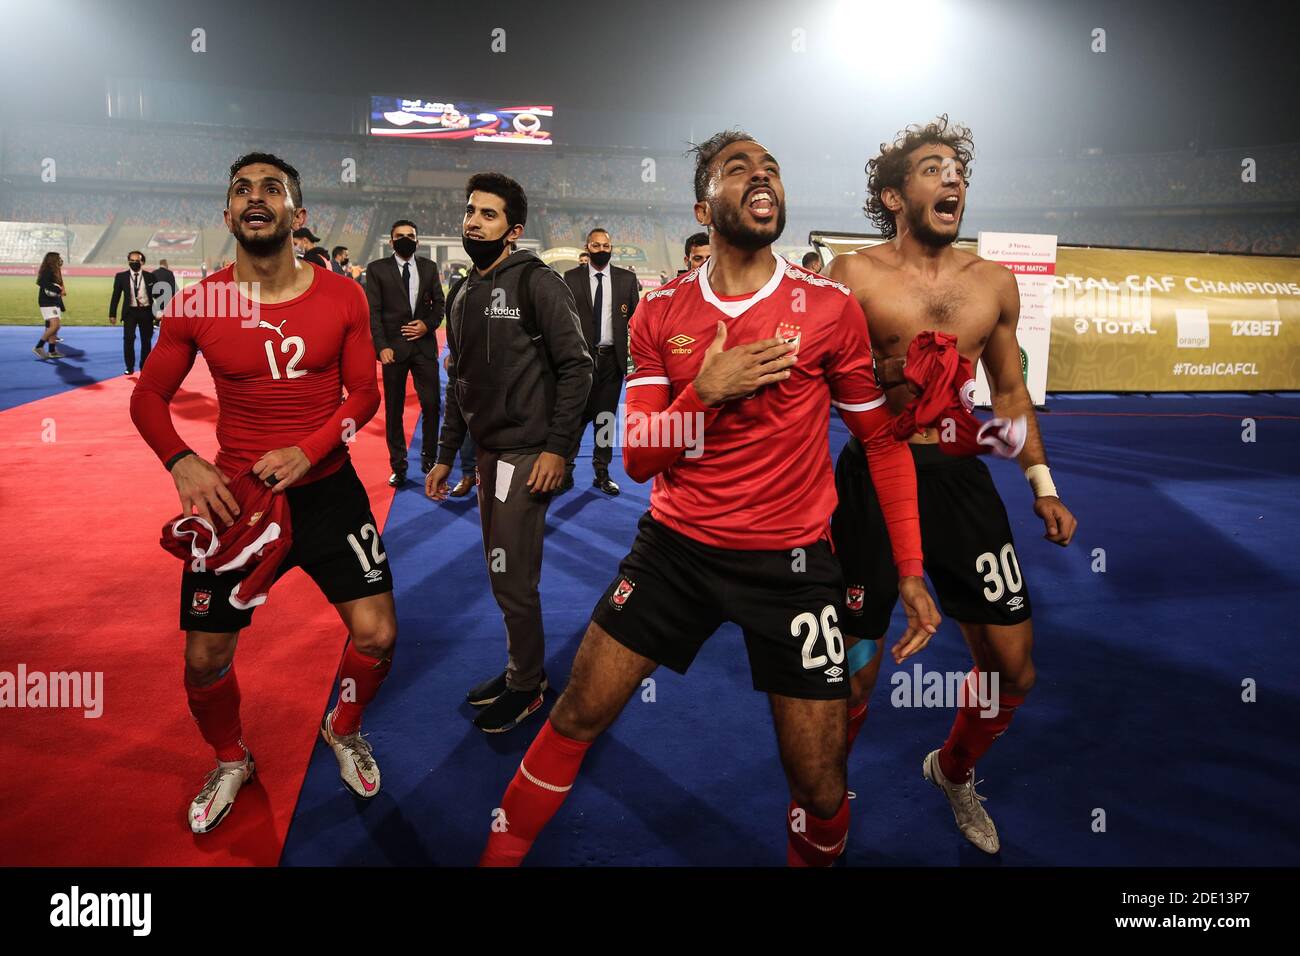 Cairo, Egypt. 27th Nov, 2020. (L-R) Al Ahly's Ayman Ashraf, Kahraba and Mohamed Hany celebrate after winning the African Champions League Final soccer match against Zamalek at Cairo International Stadium. Credit: Sameh Abo Hassan/dpa/Alamy Live News Stock Photo